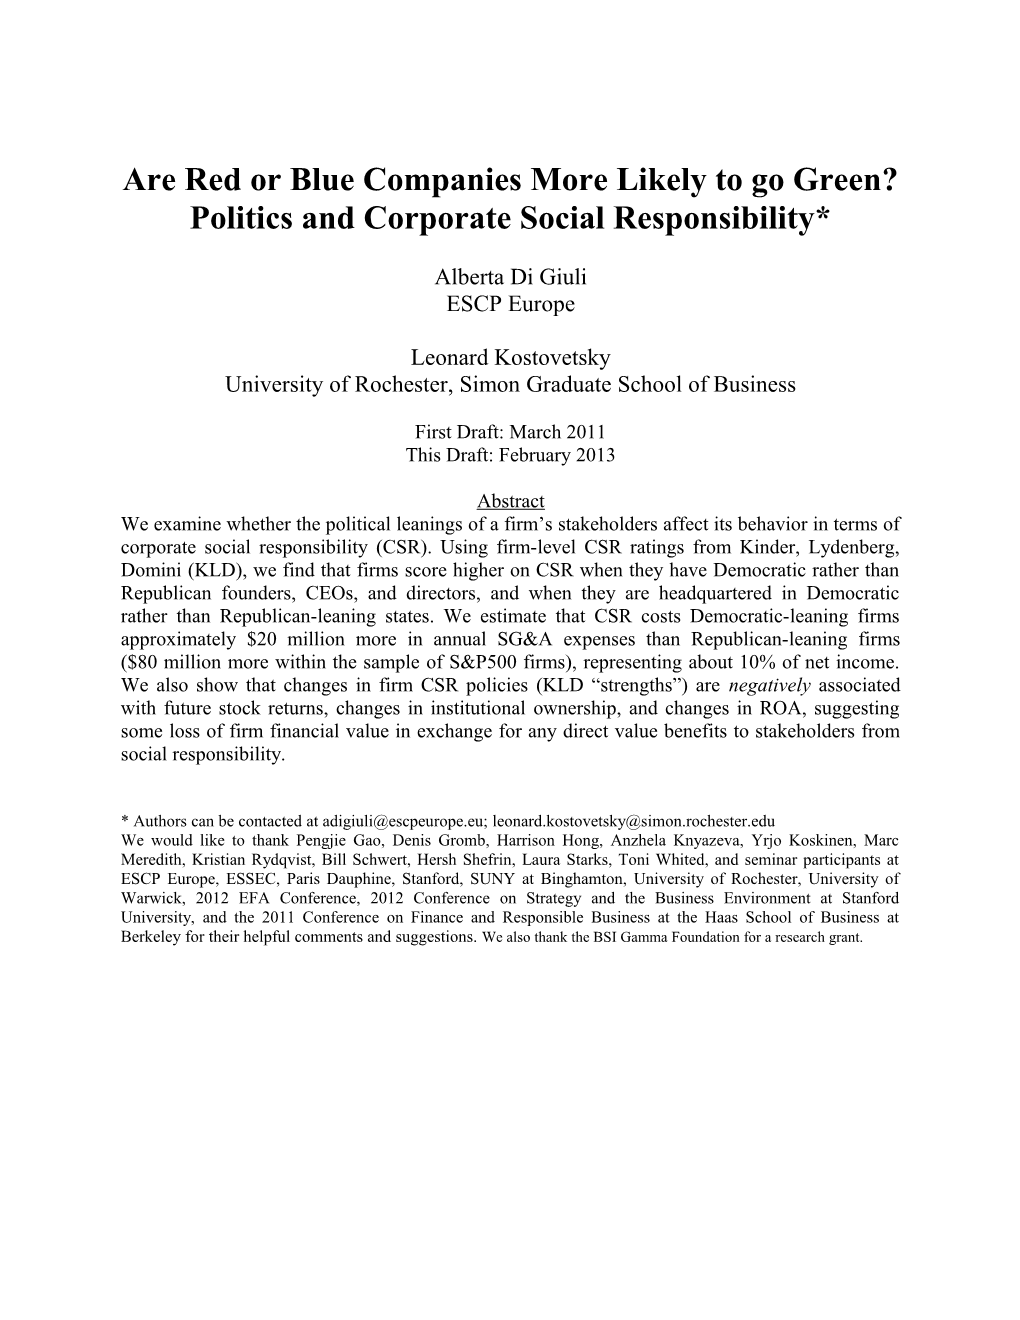 Are Red Or Blue Companies More Likely to Go Green?